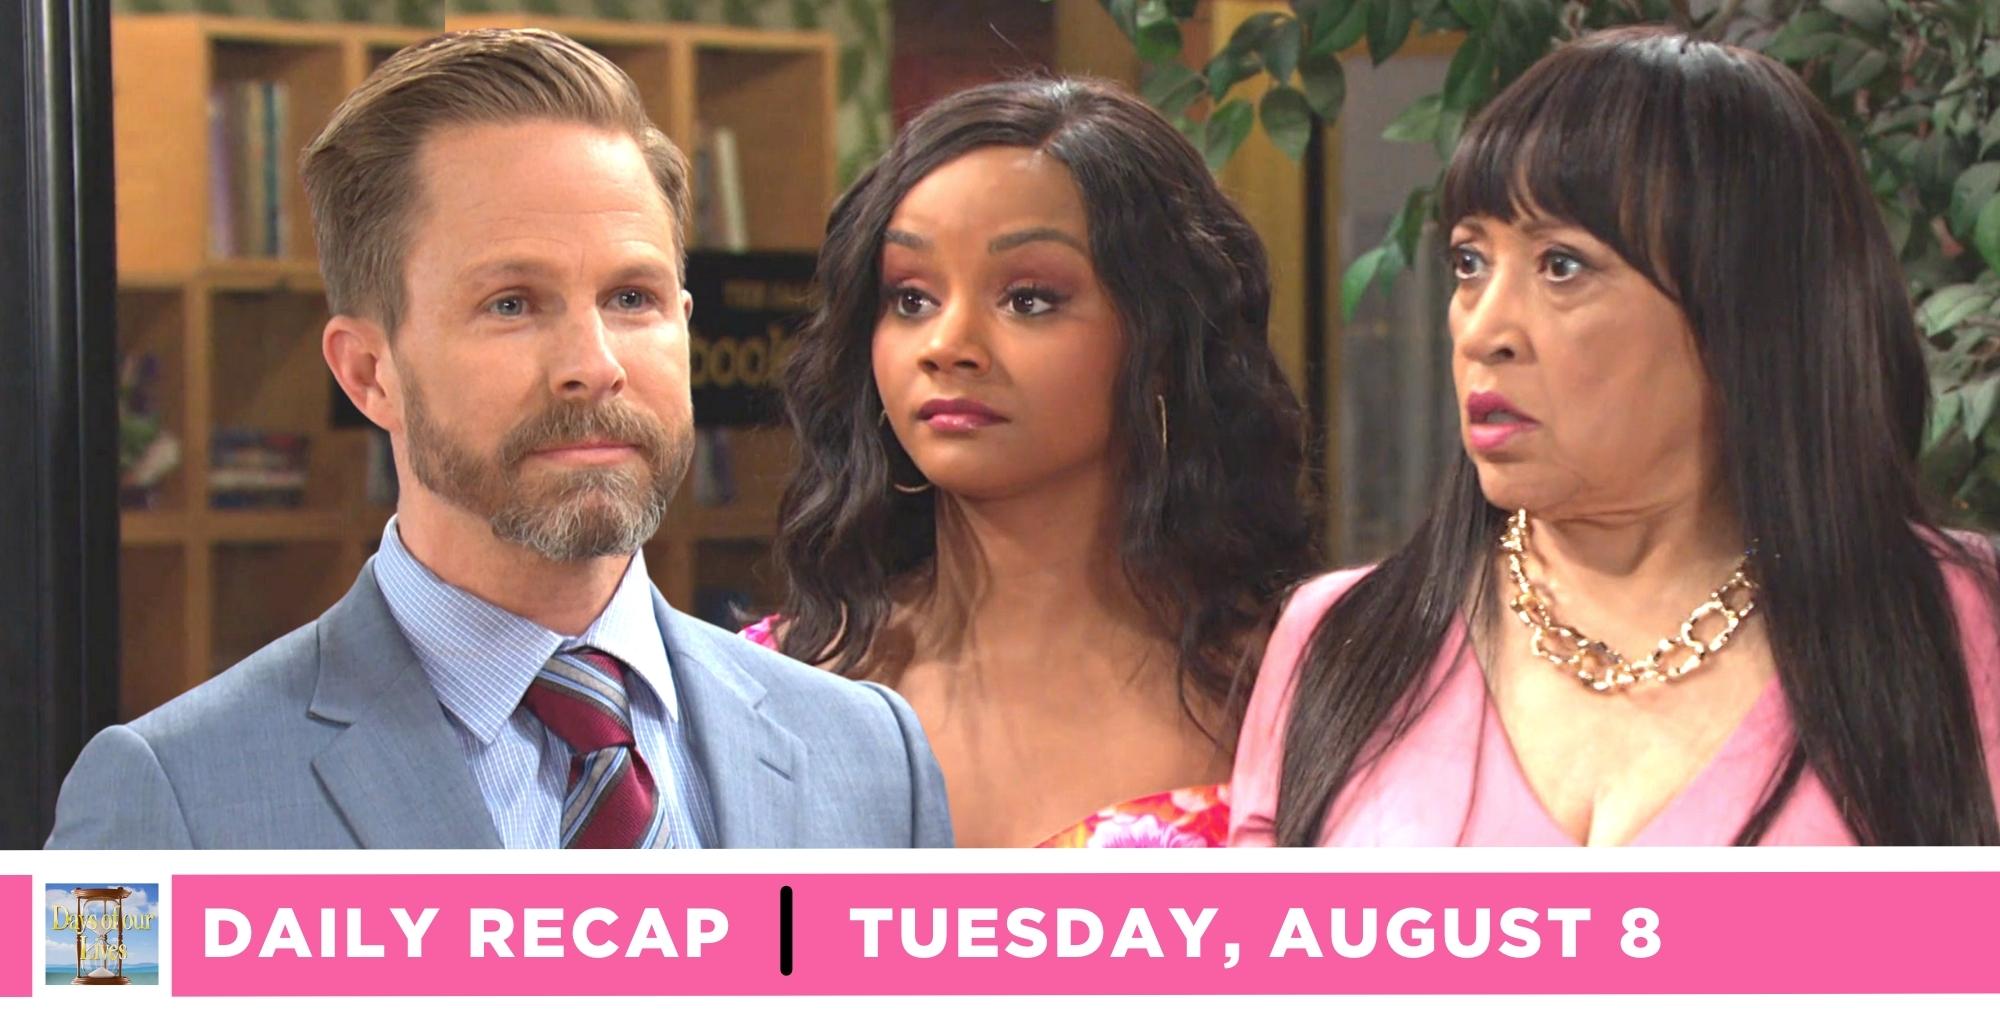 days of our lives recap for tuesday, august 8, 2023, three images rawlins, chanel, and paulina.